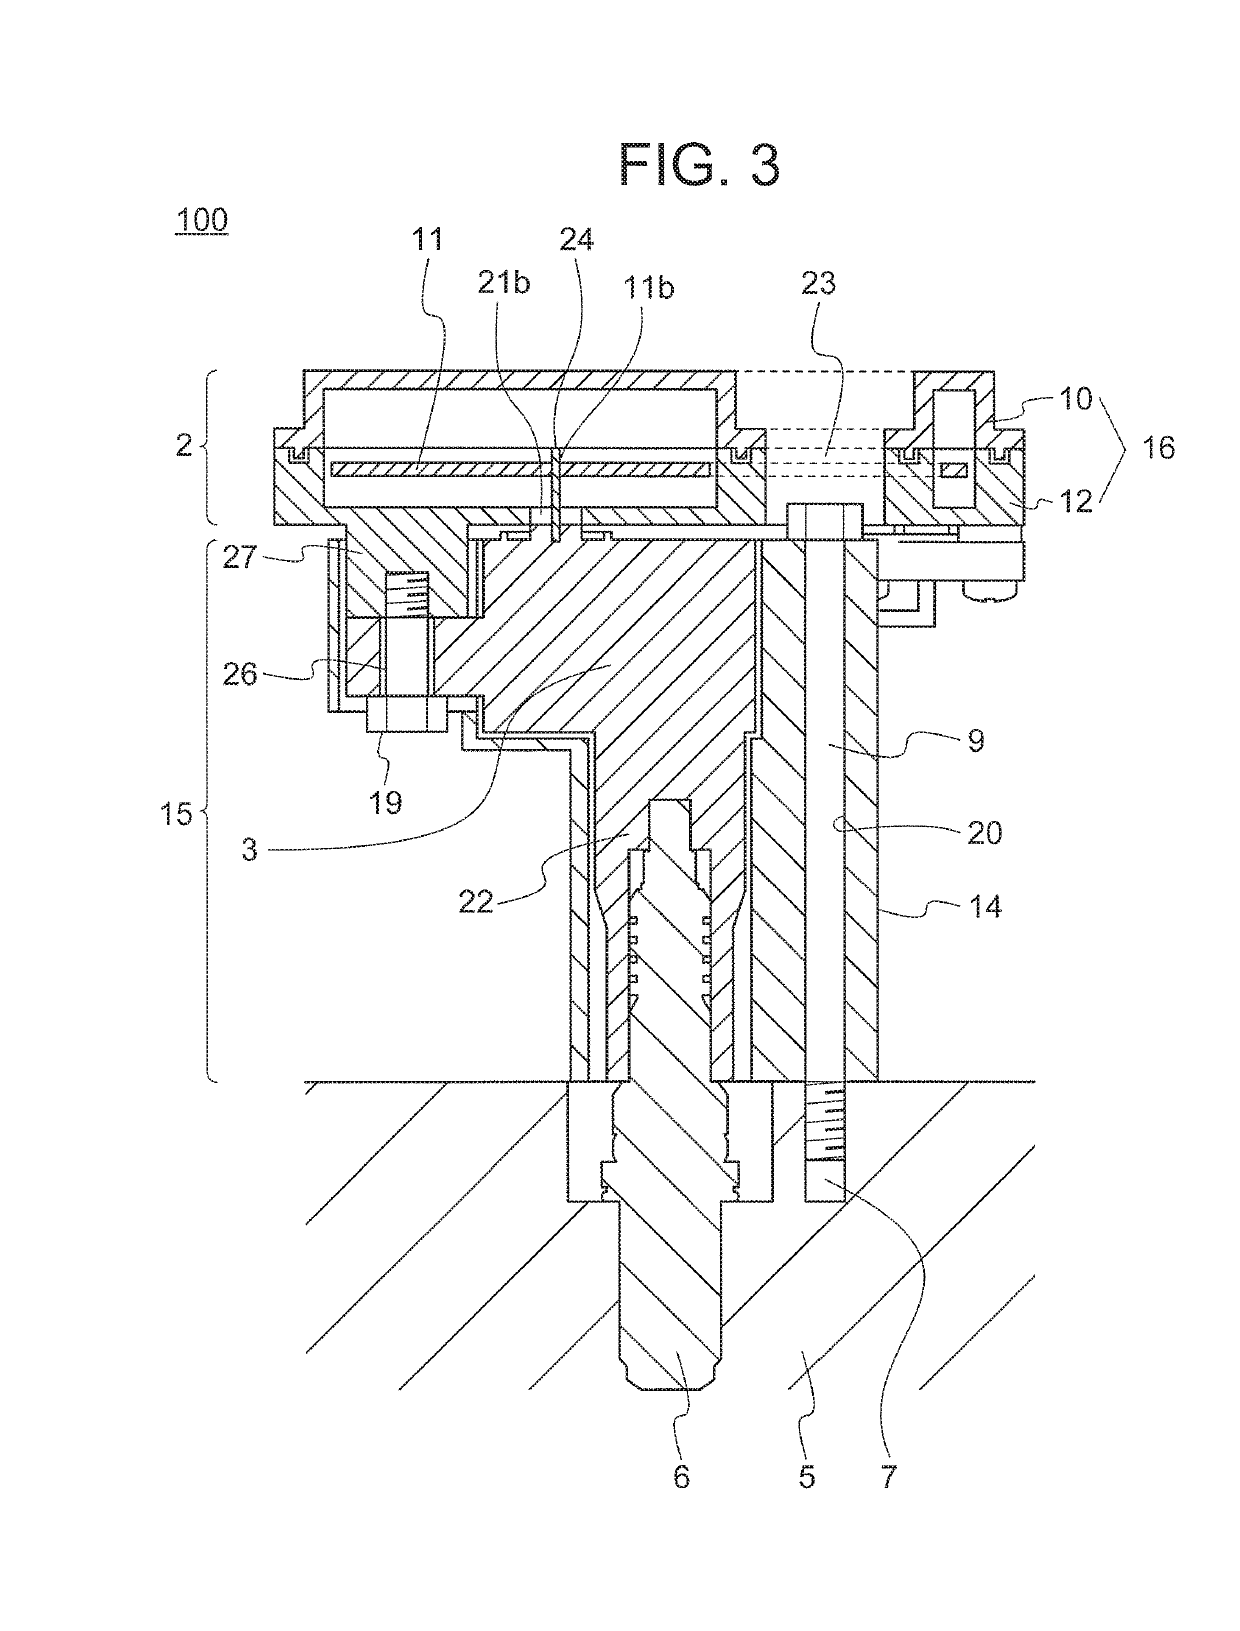 High frequency discharge ignition device